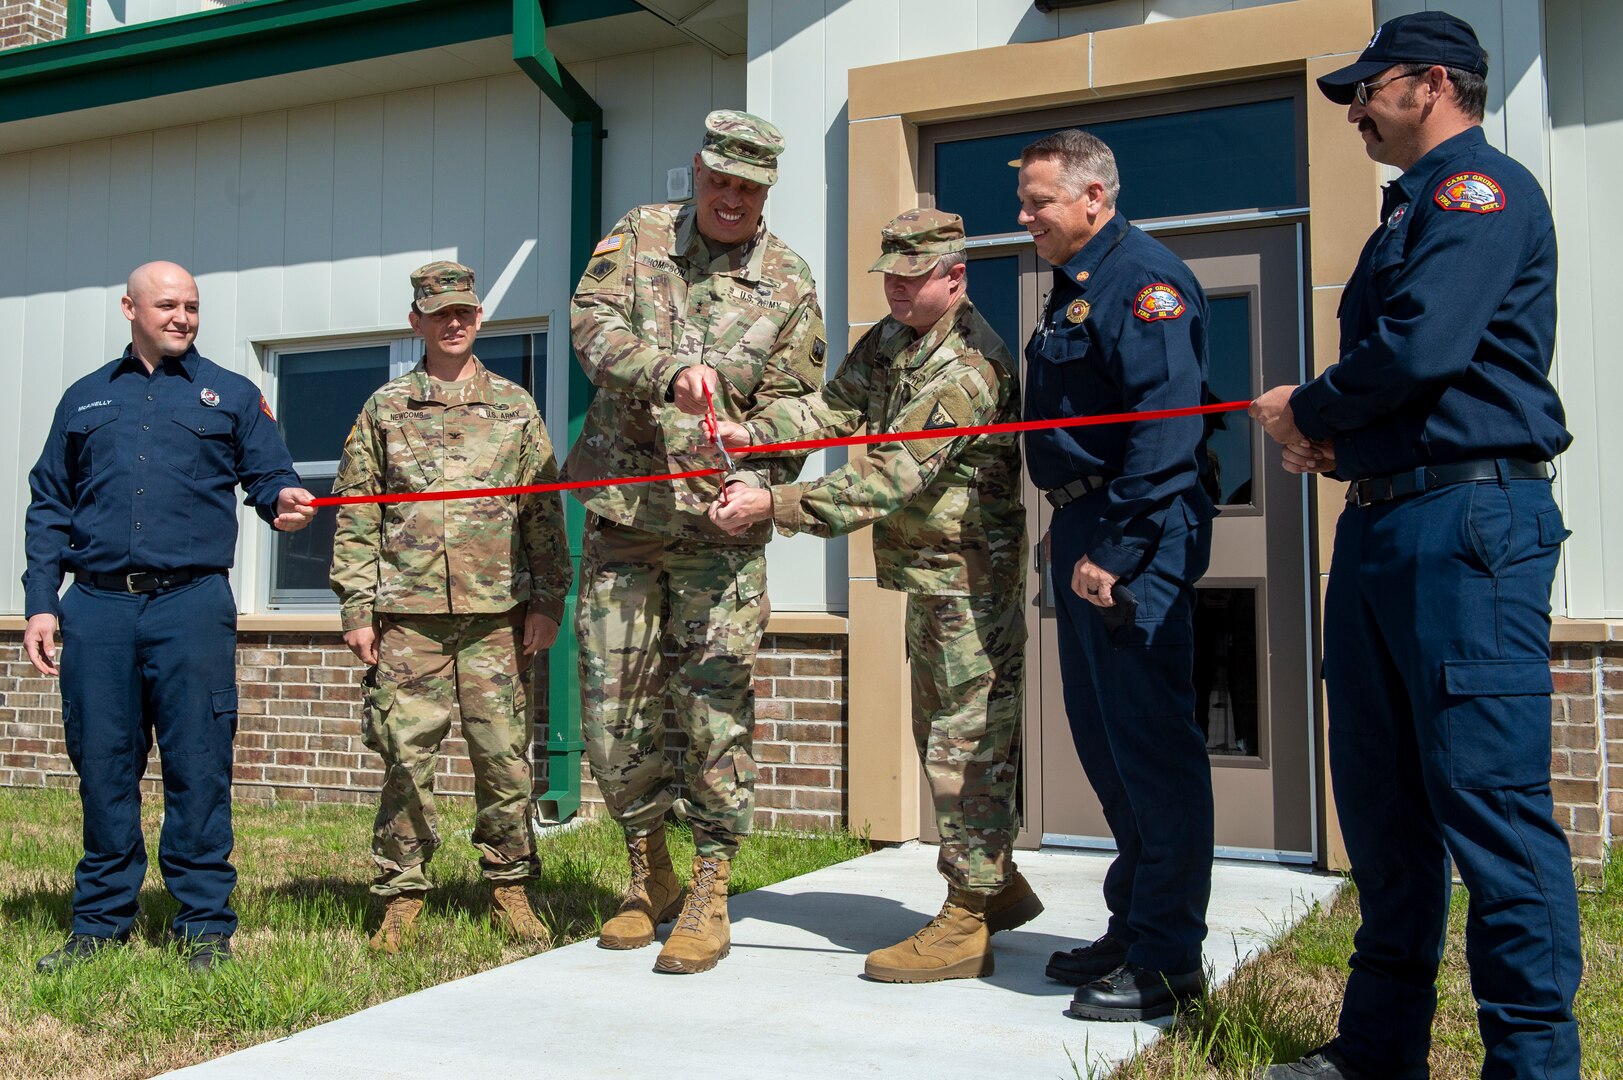 Maj. Gen. Michael Thompson, adjutant general for Oklahoma, and Col. Brad Carter, commander of Camp Gruber Training Center cut the ceremonial ribbon officially opening Fire Station Number 1 on Camp Gruber, Oklahoma, March 24, 2021. (Oklahoma National Guard photo by Anthony Jones)